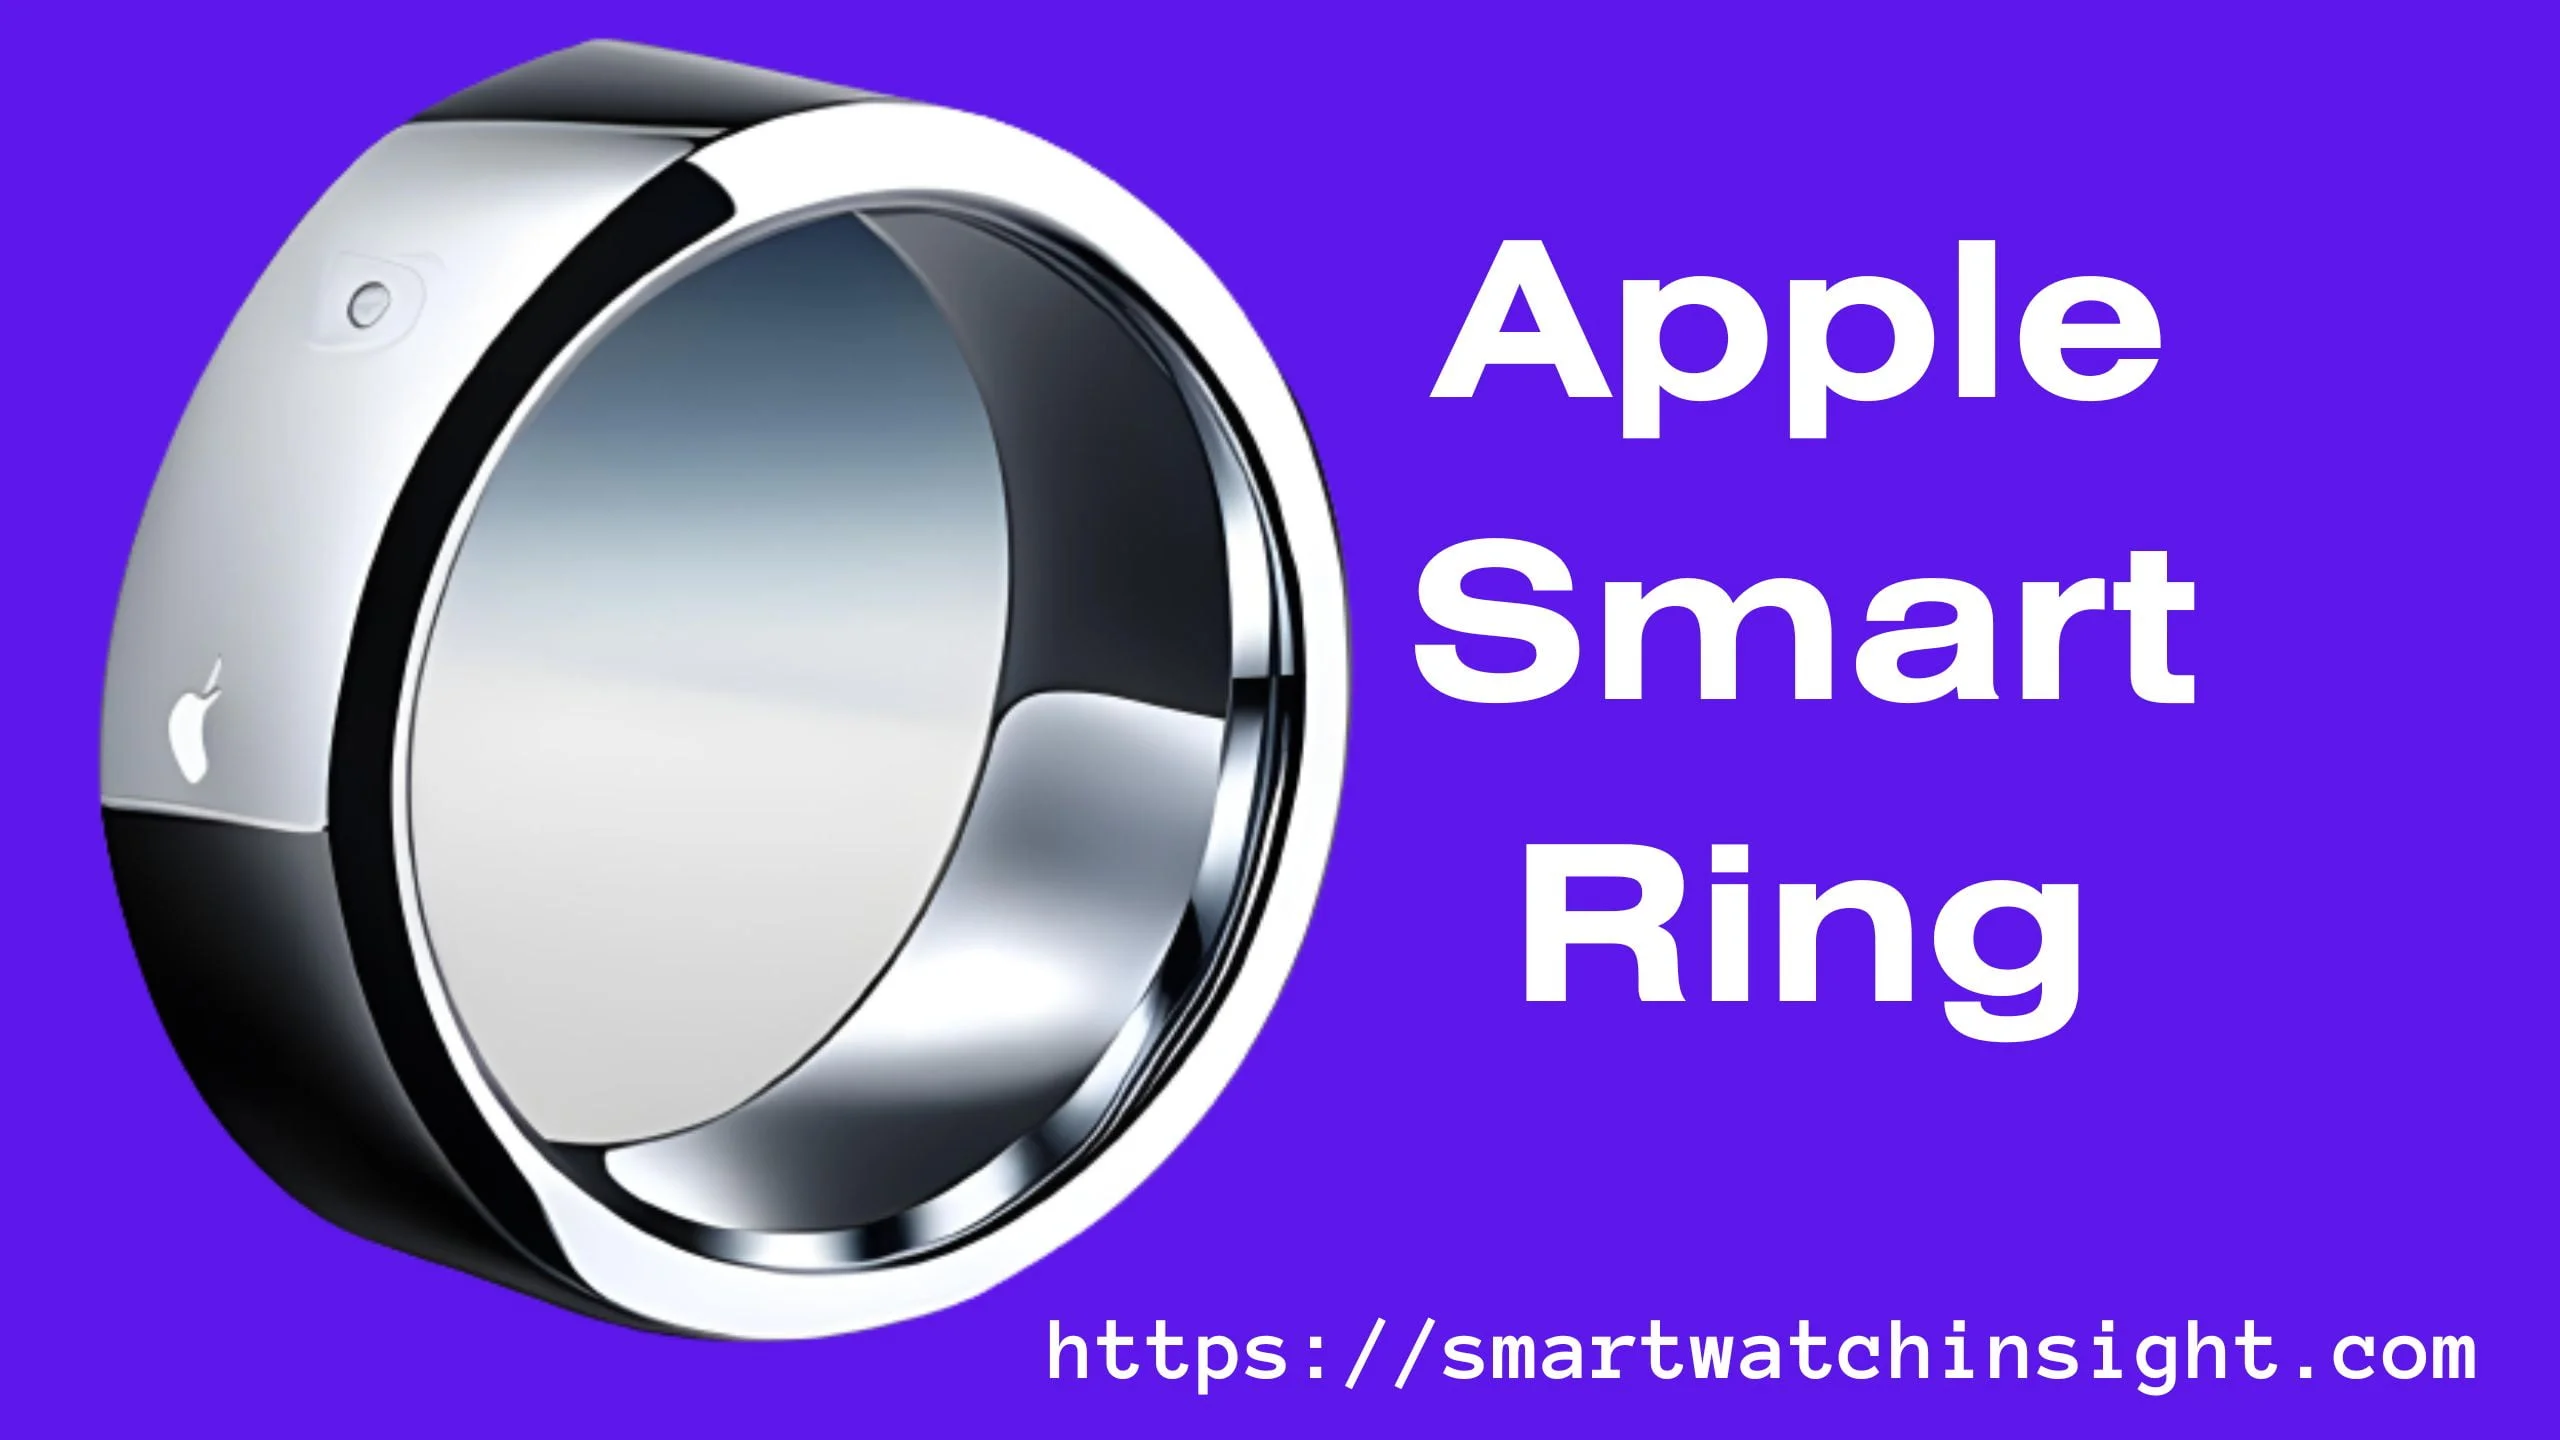 Apple Smart Ring: The Release Date, Price, Is Almost Here!